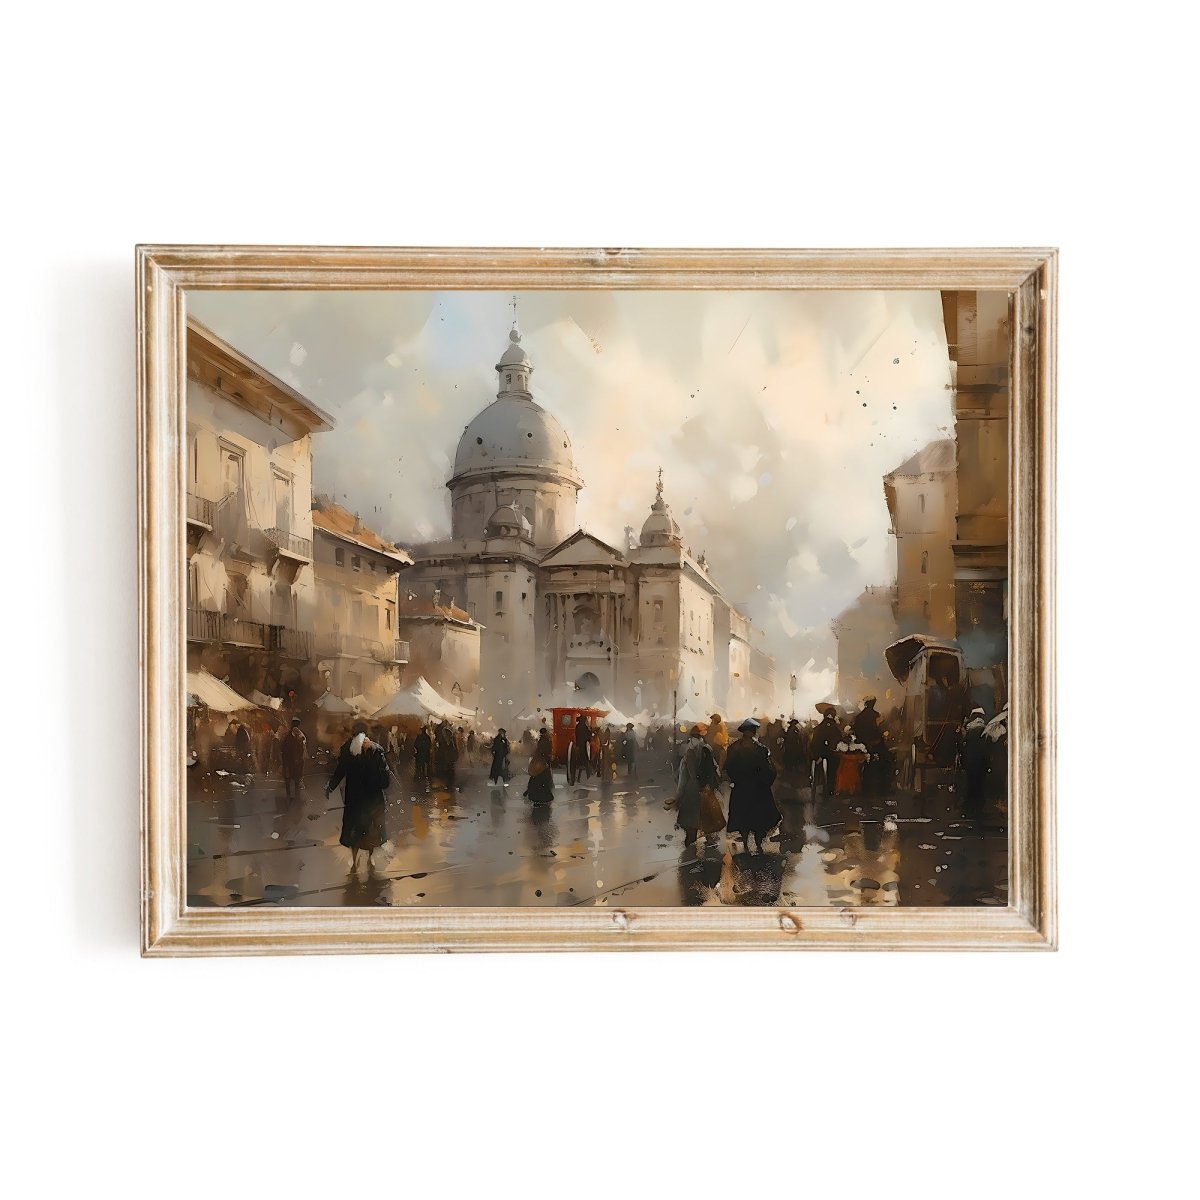 Rome 19th Century Street View Vintage Wall Art Cityscape Impressionistic Painting - Everything Pixel